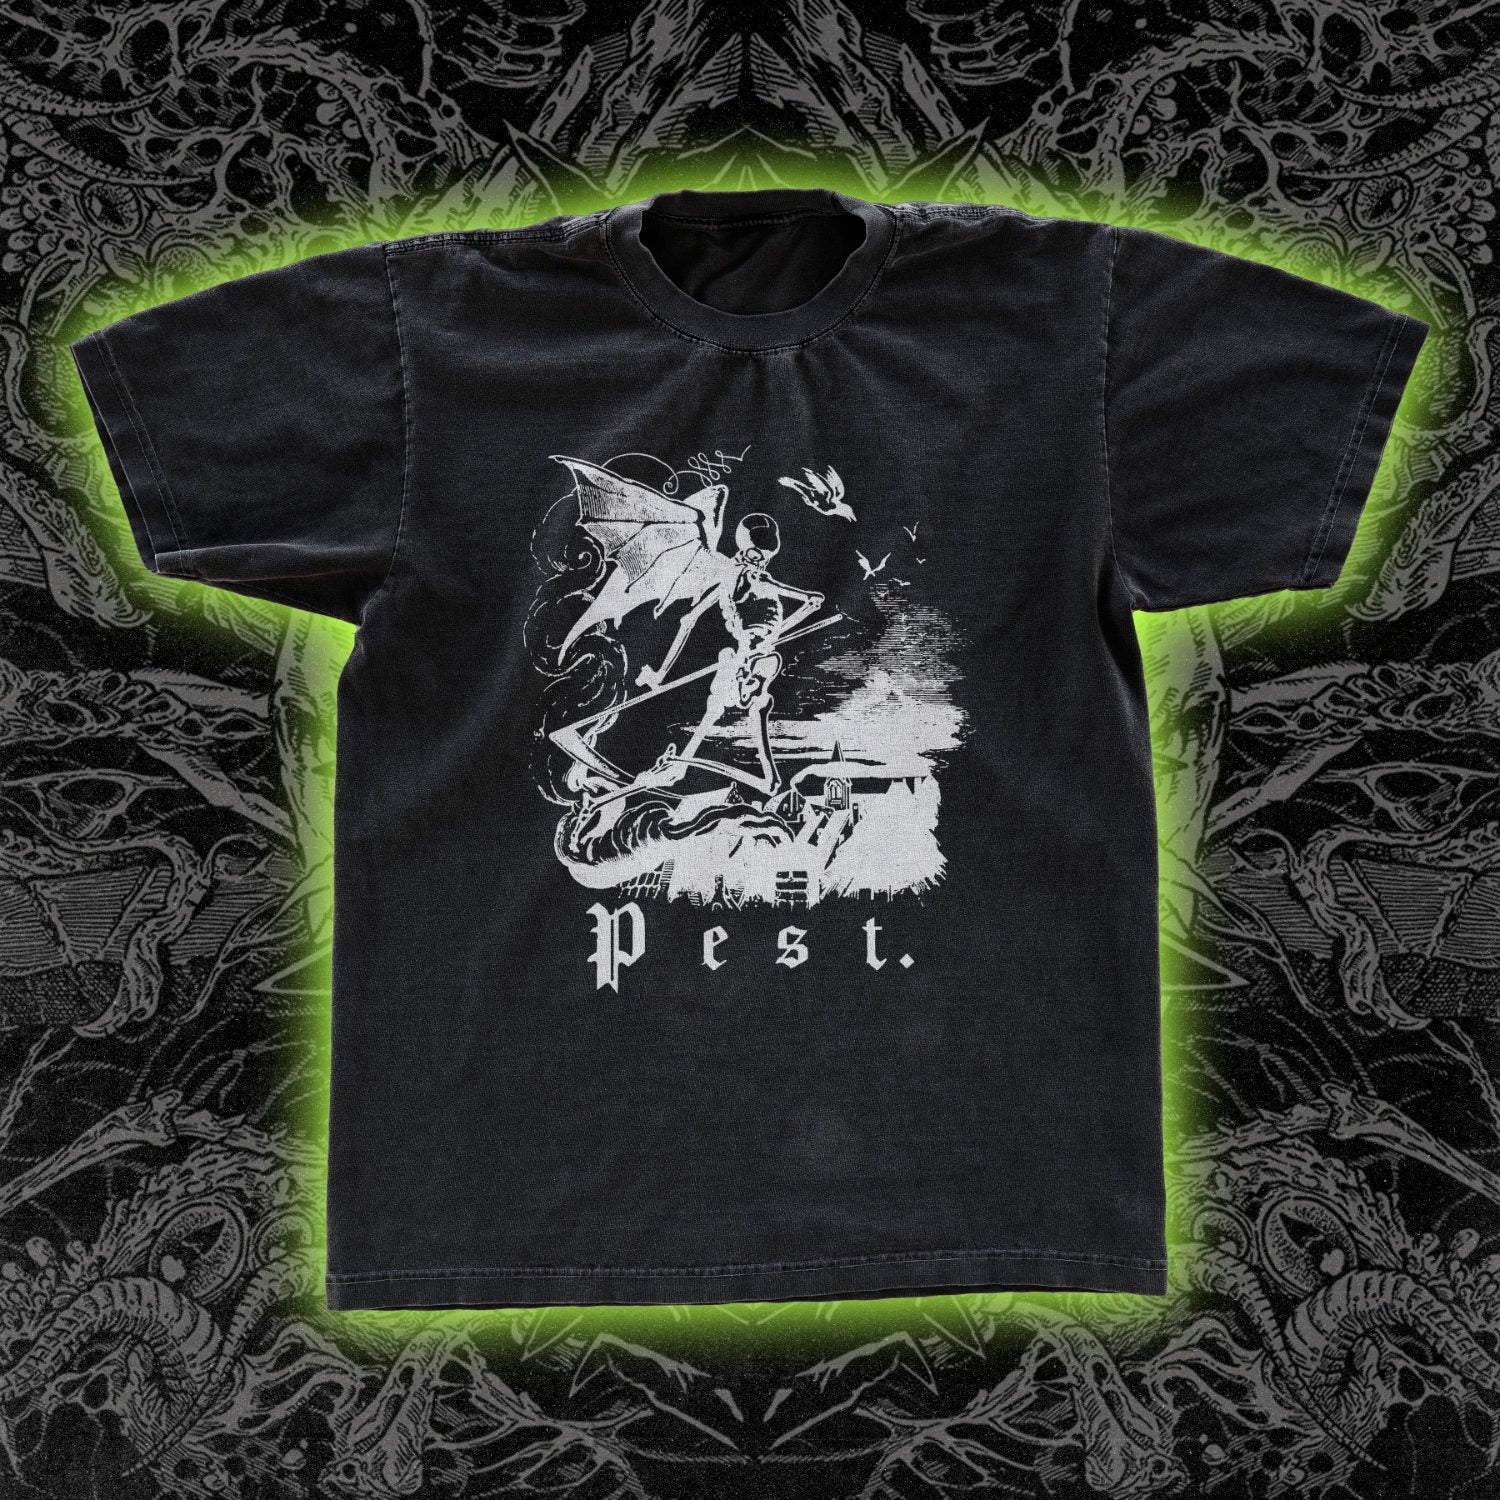 Winged Plague Classic Tee